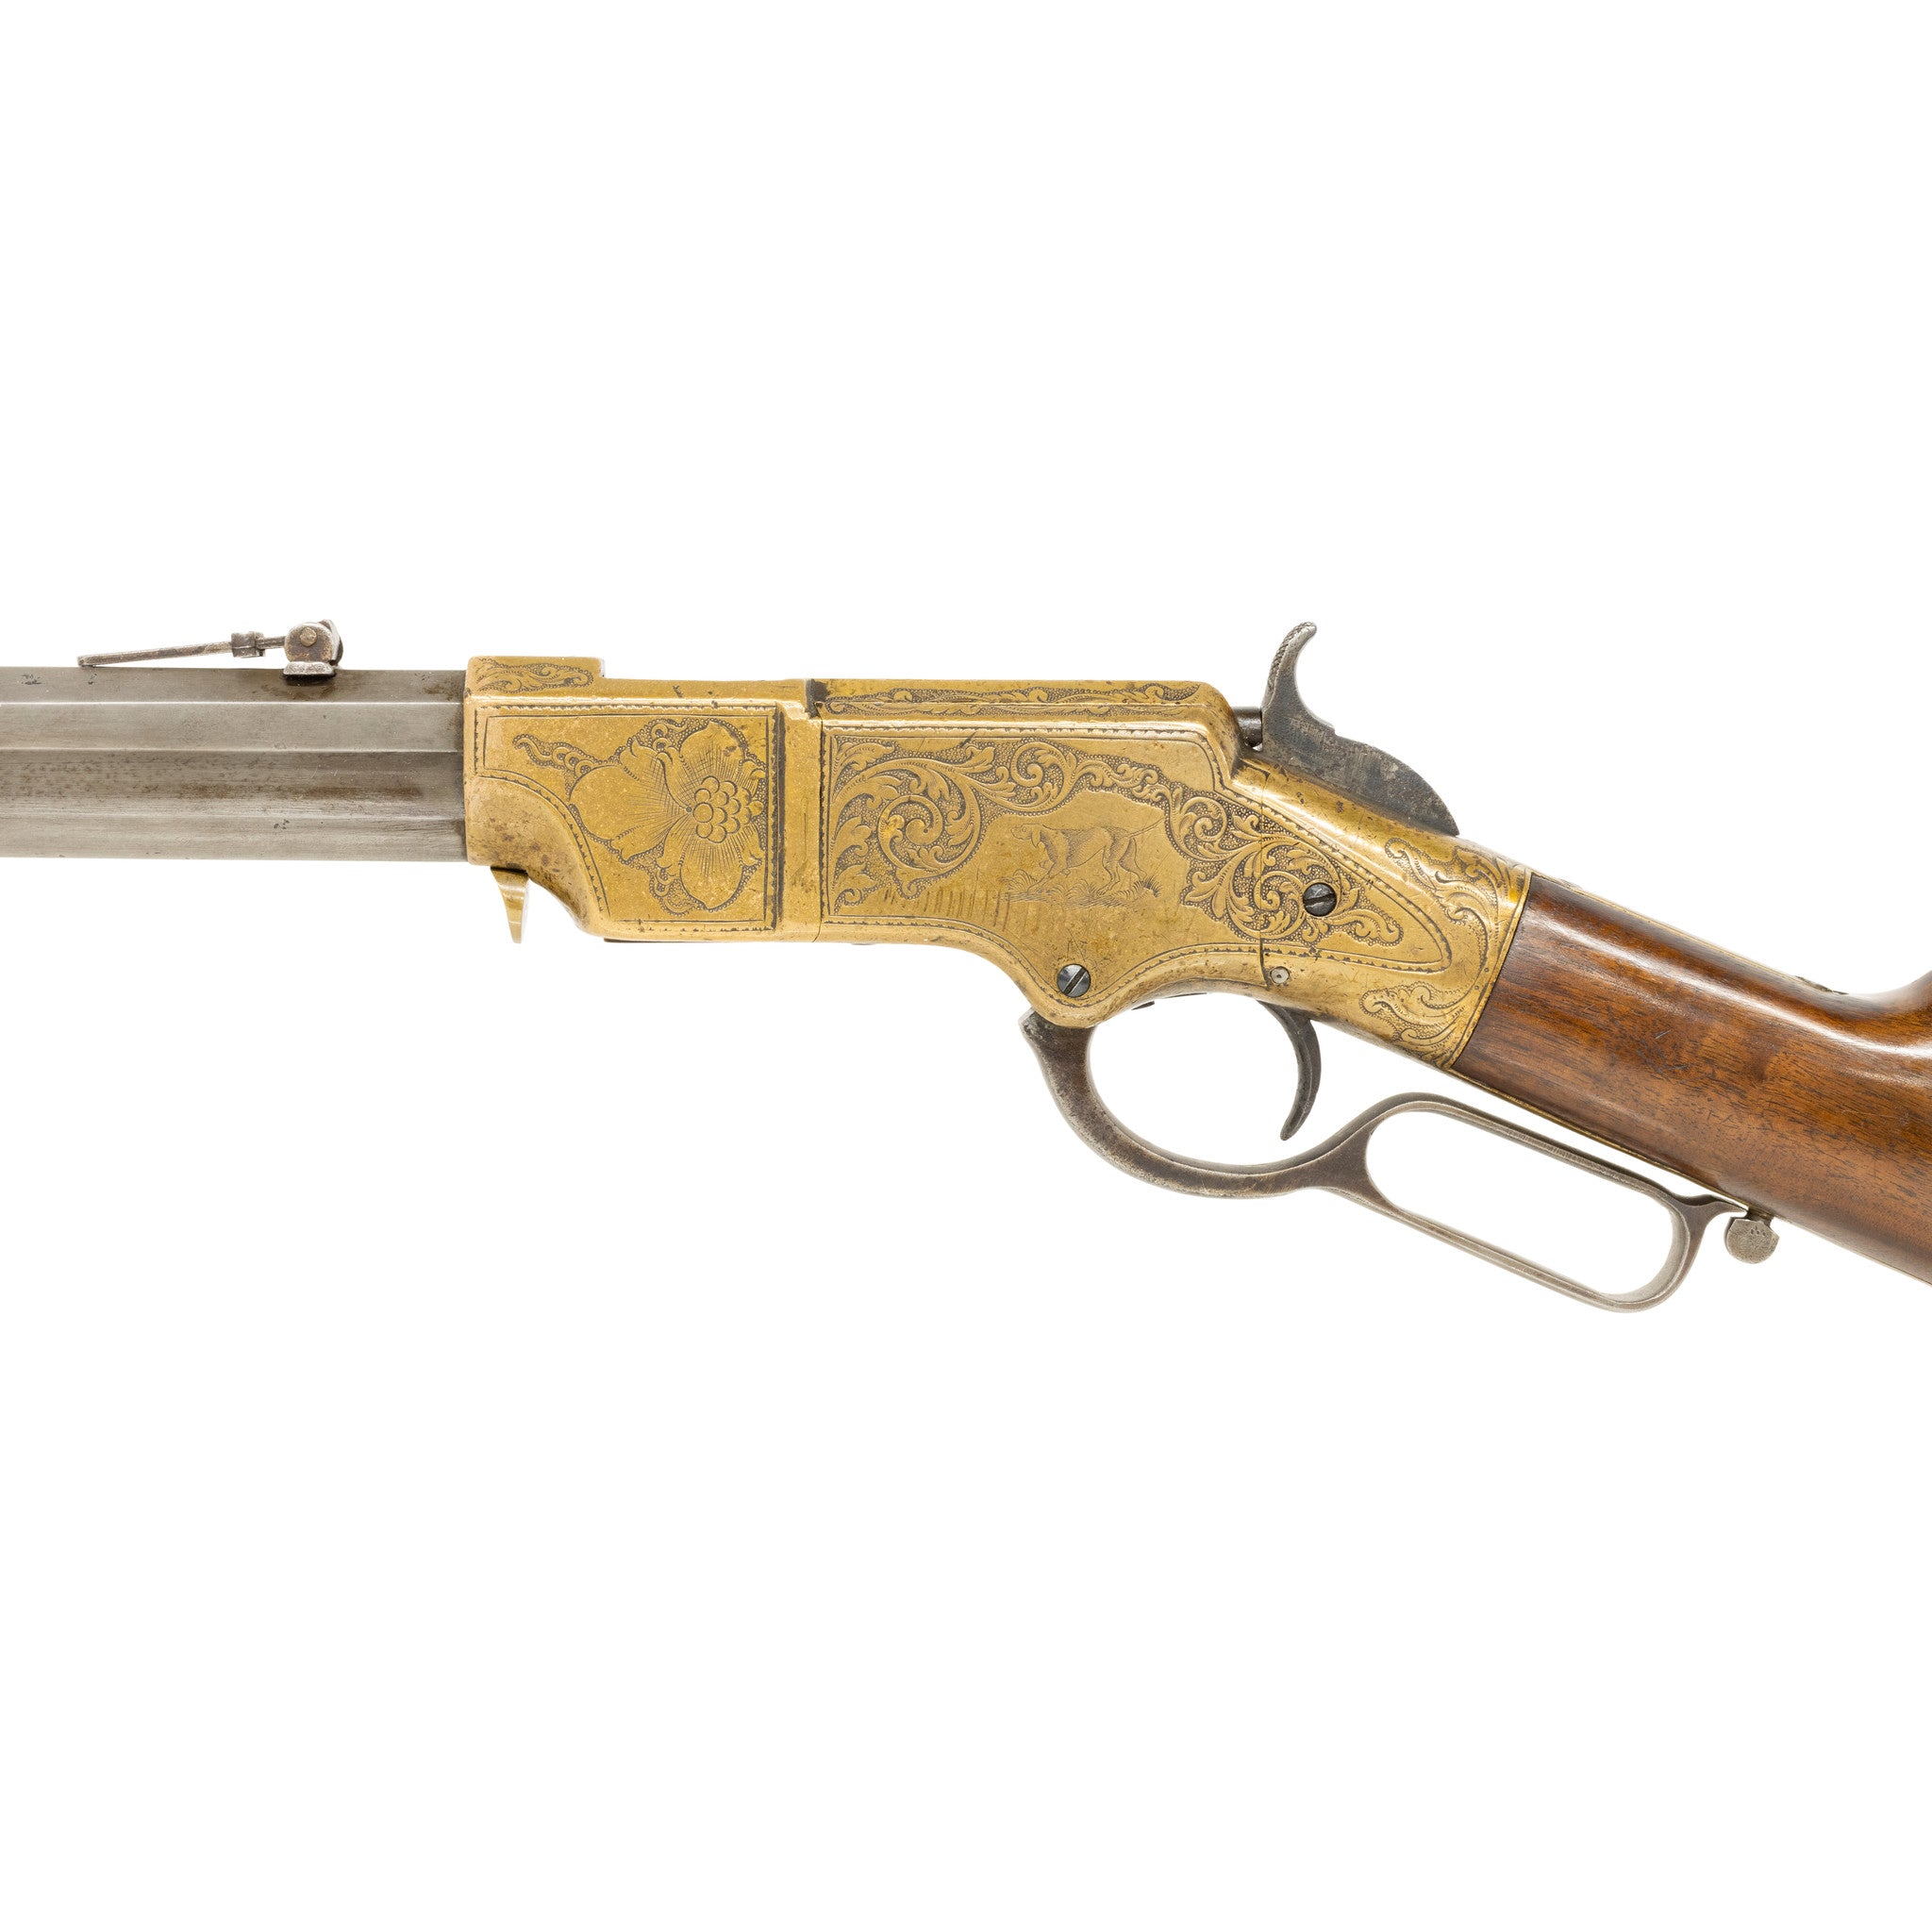 New Haven Arms Co. Henry Lever Action Rifle